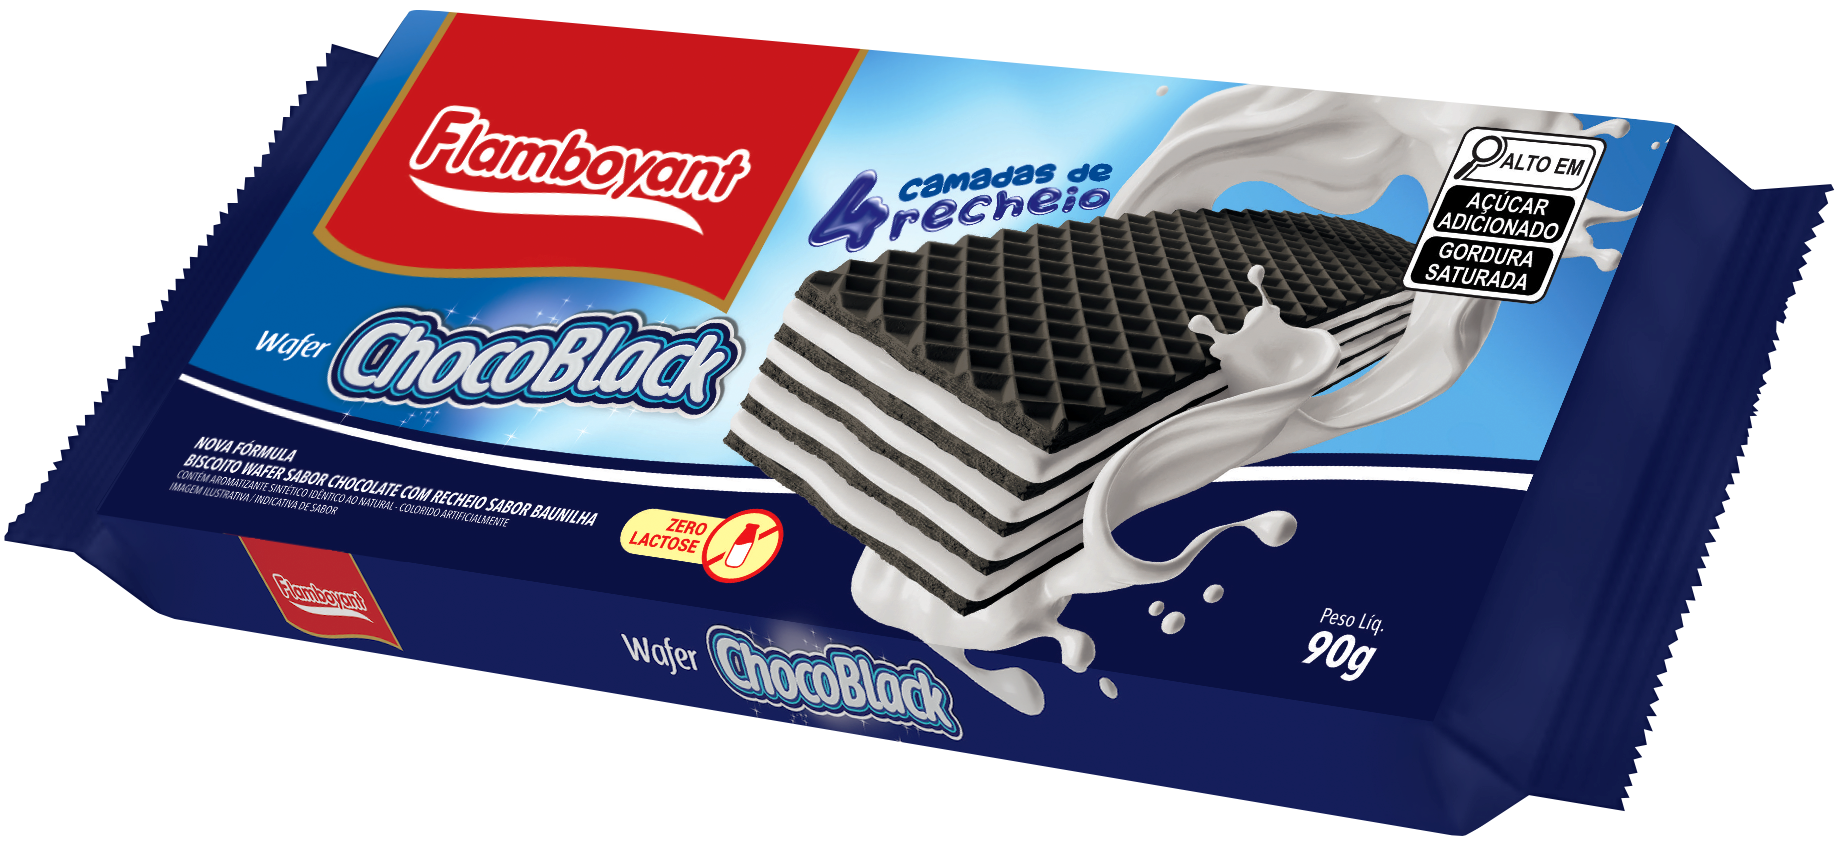 FLAMB BISC WAFER CHOCOBLACK 90GRS CX/40